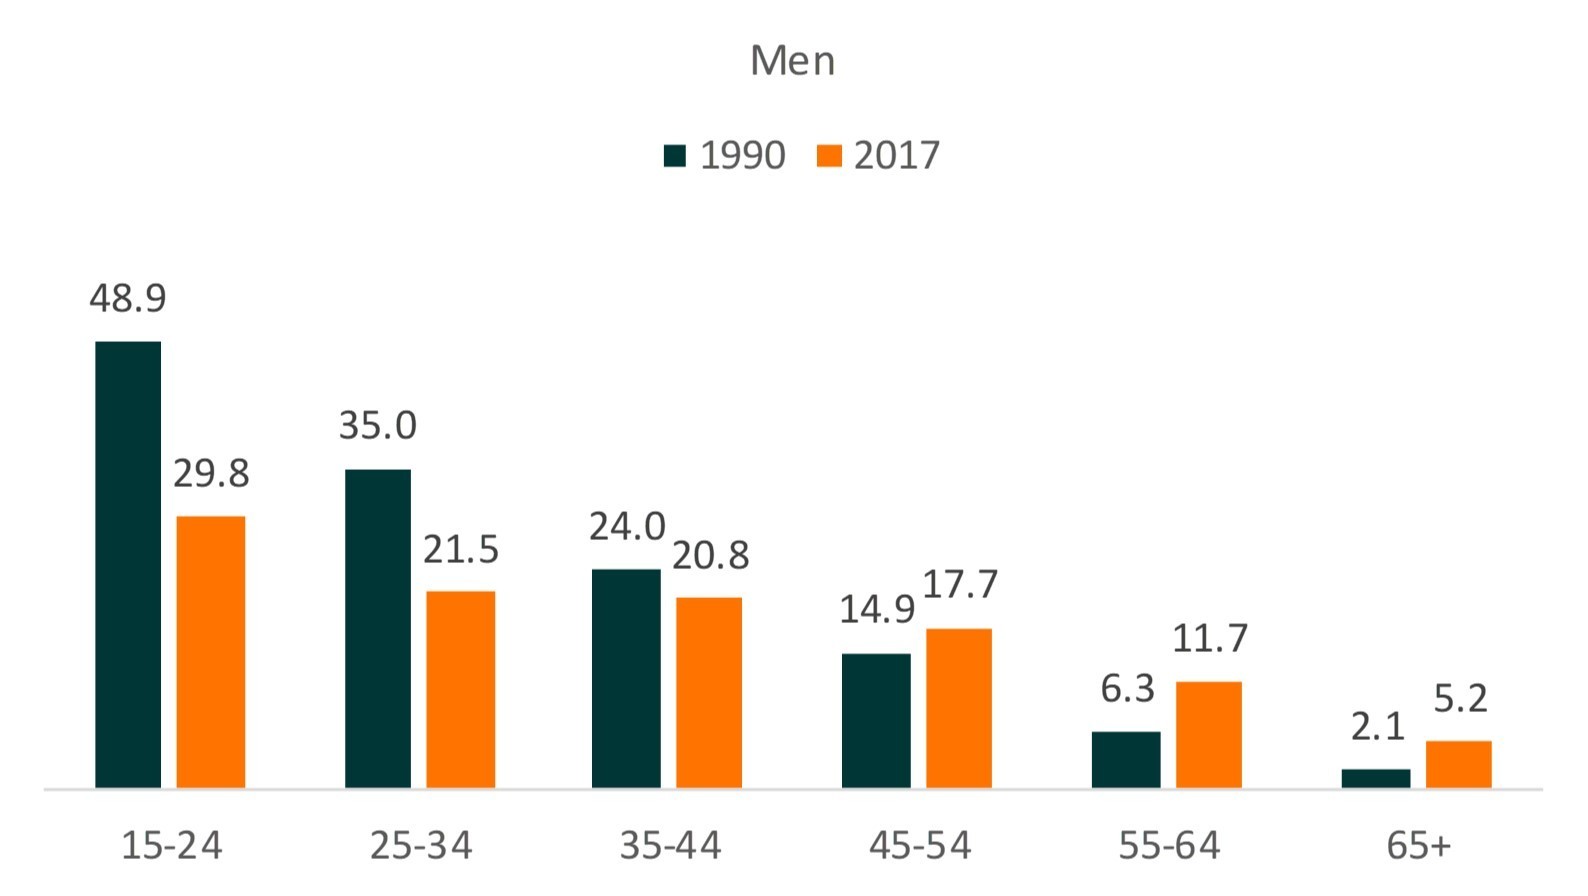 Age Variation In The Divorce Rate 1990 And 2017